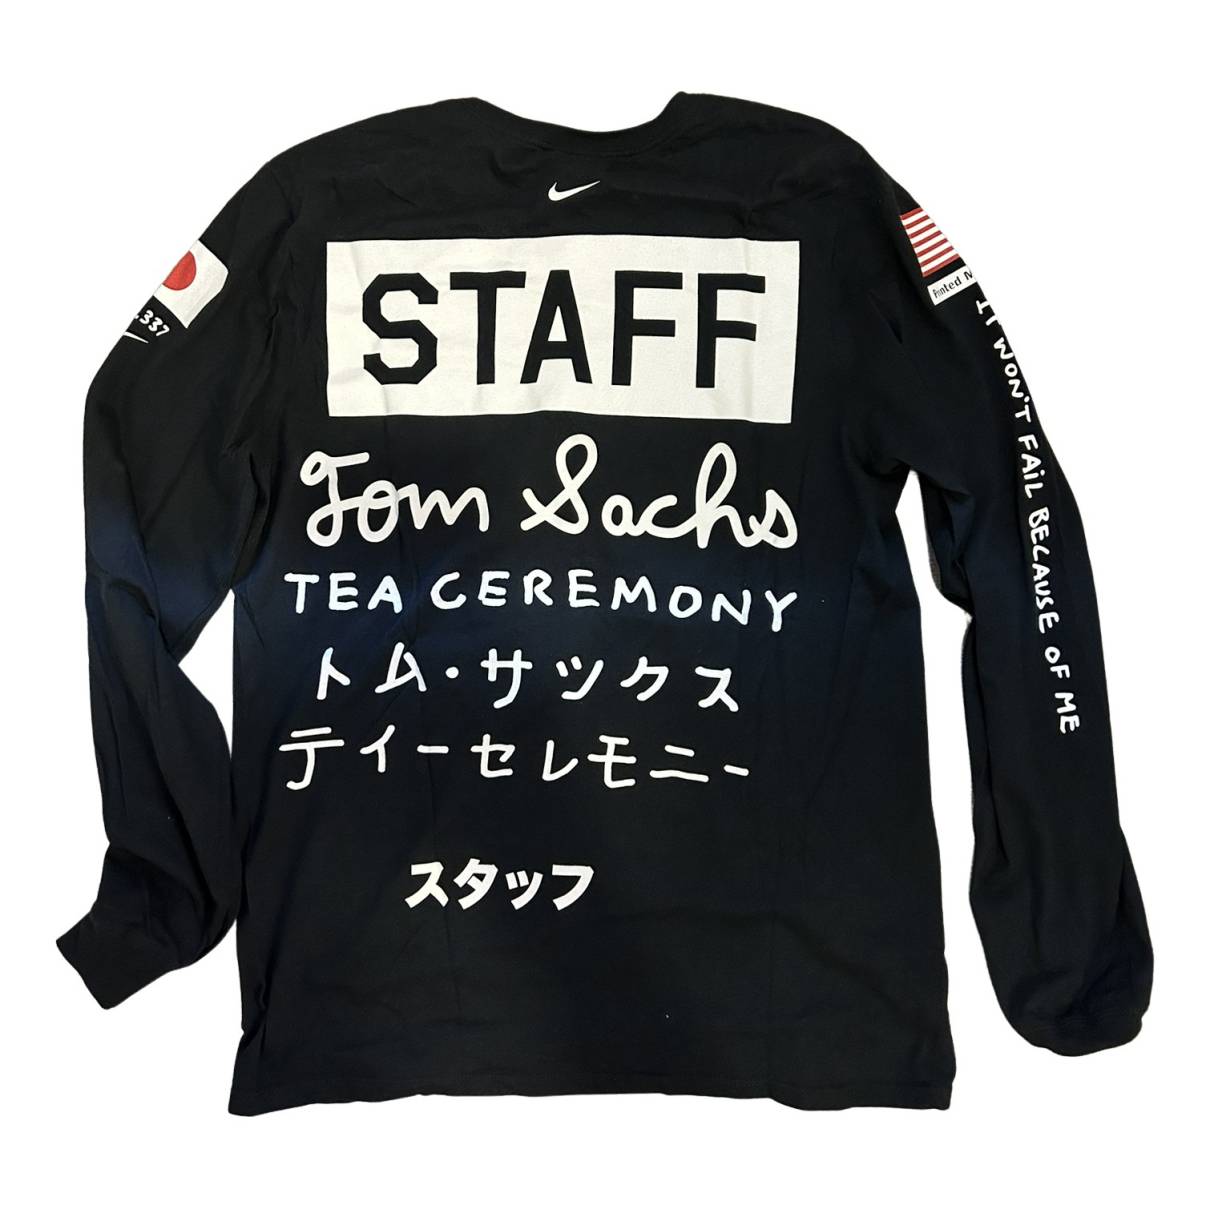 Nike Tom Sachs Authenticated T-Shirt